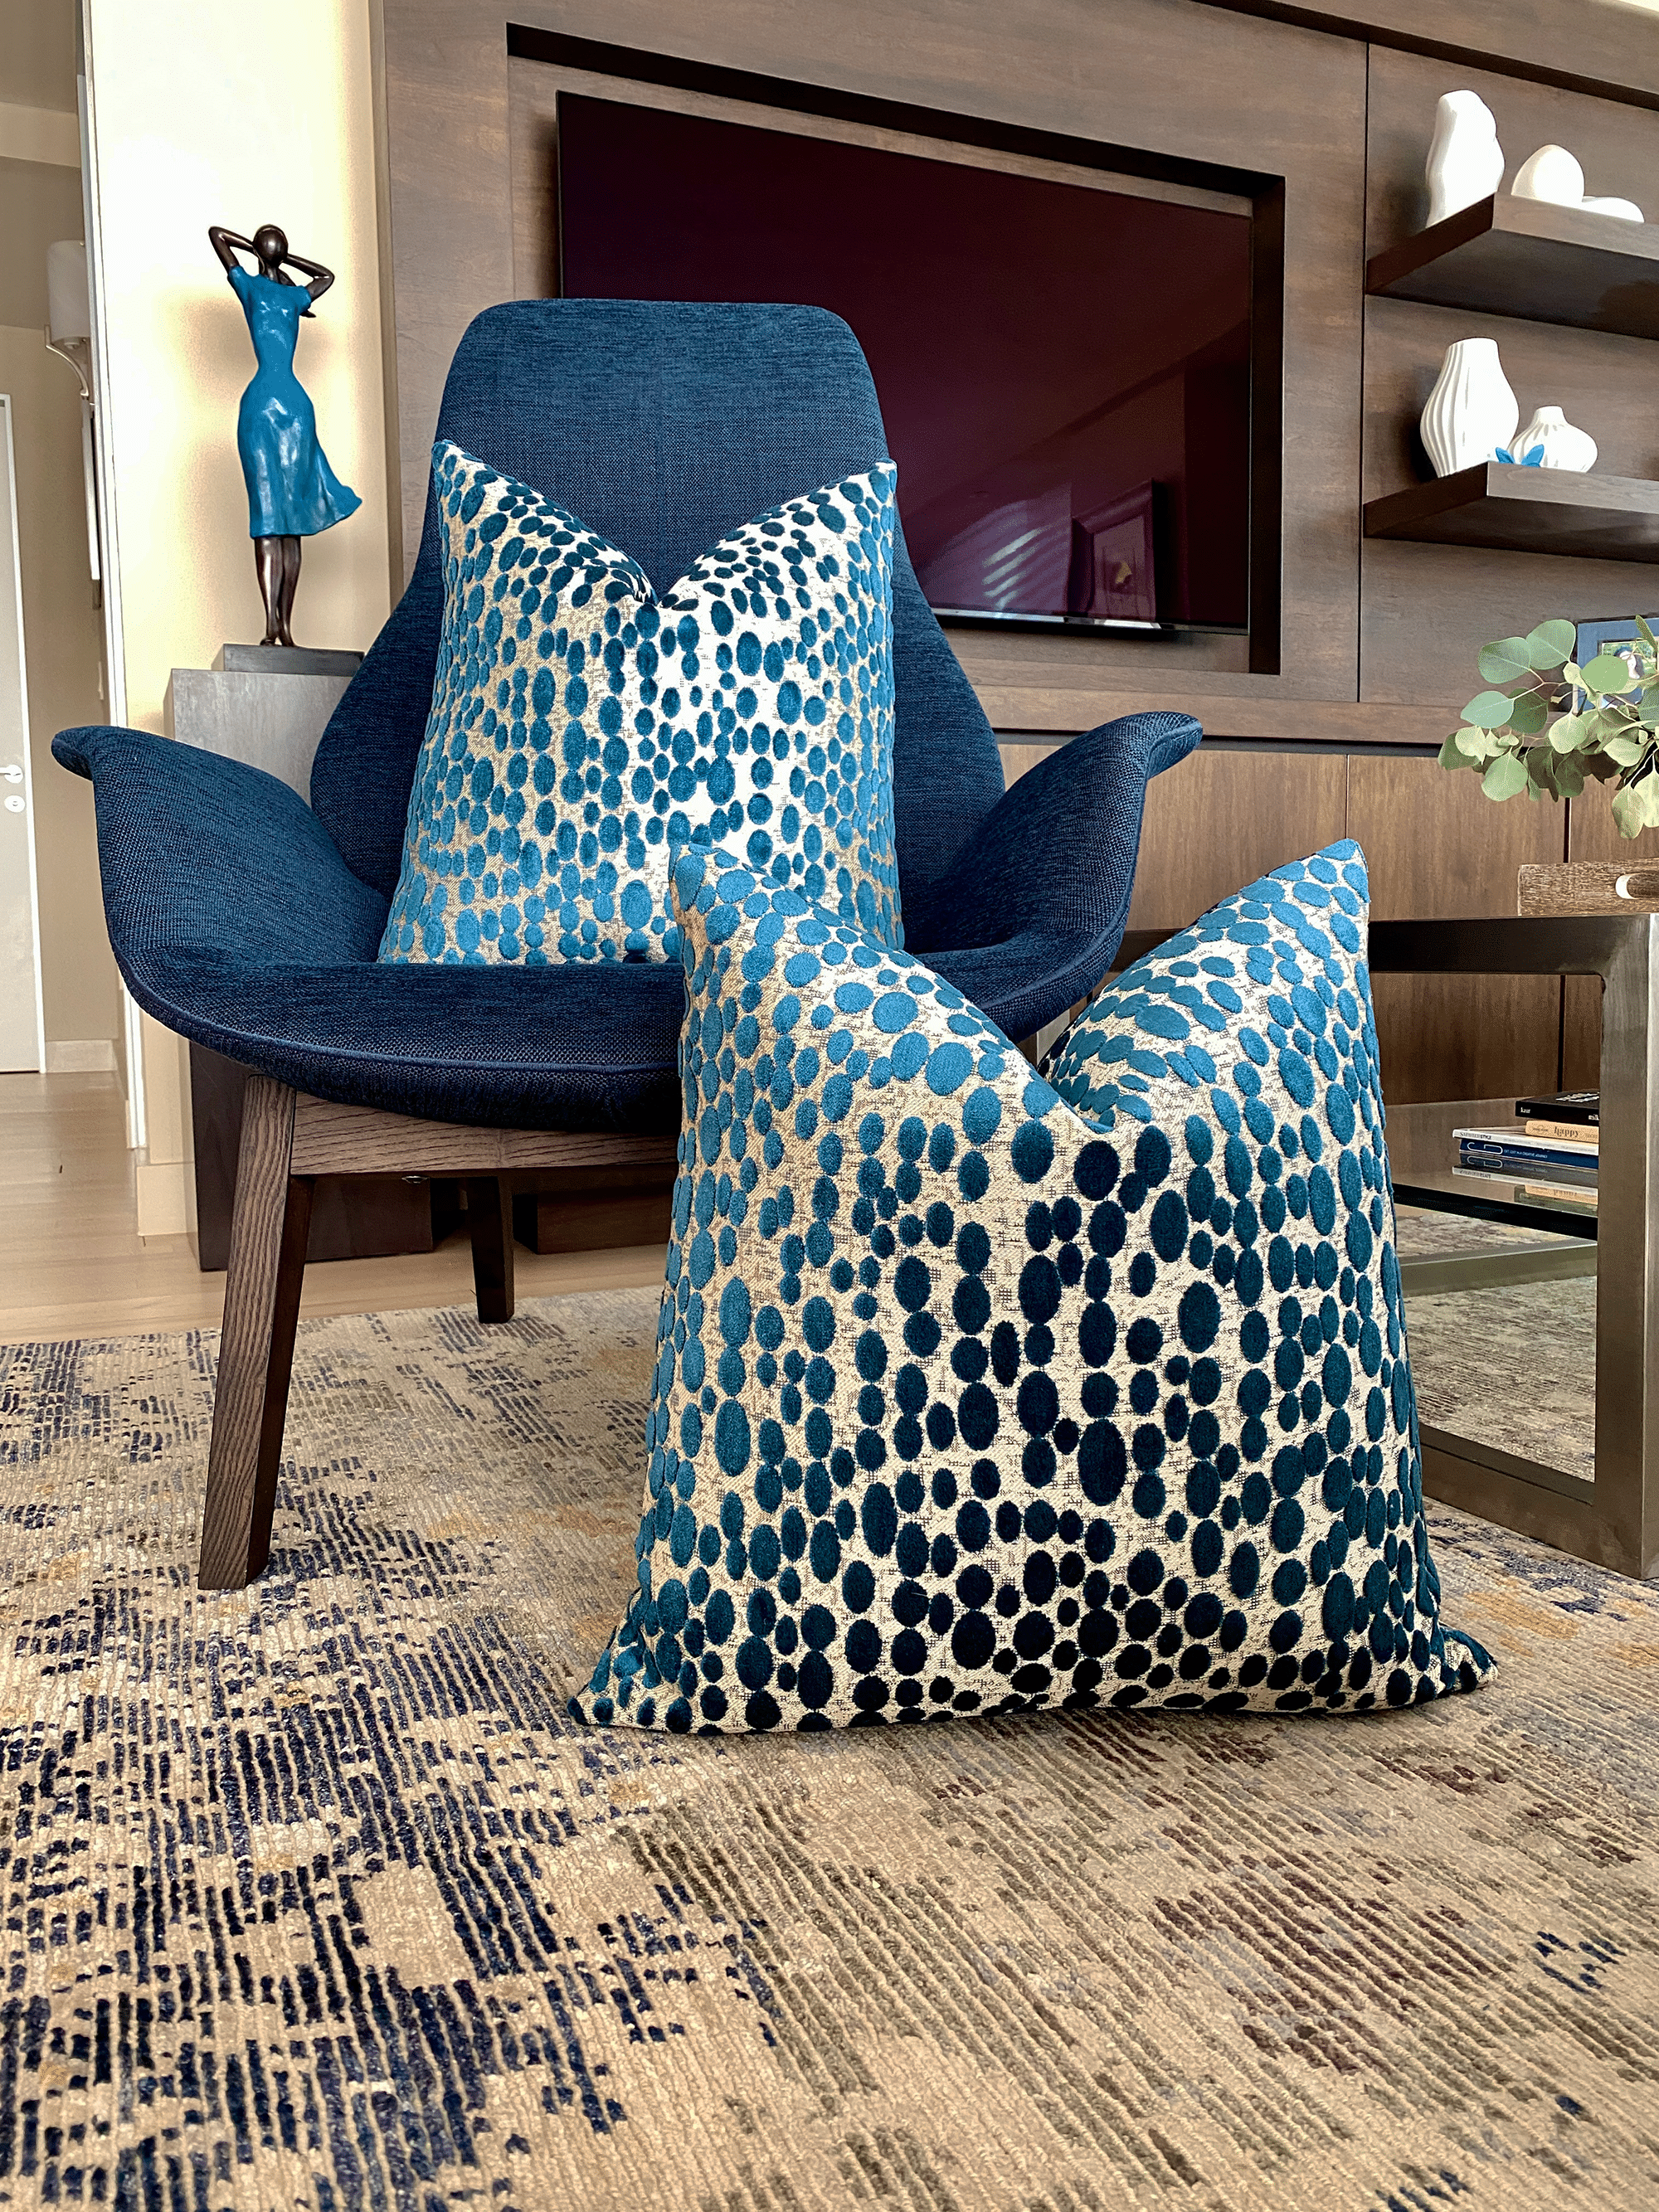 https://smithyhomecouture.com/wp-content/uploads/2021/08/decor-pillows-aegan-blue-on-blue-chair-01.png